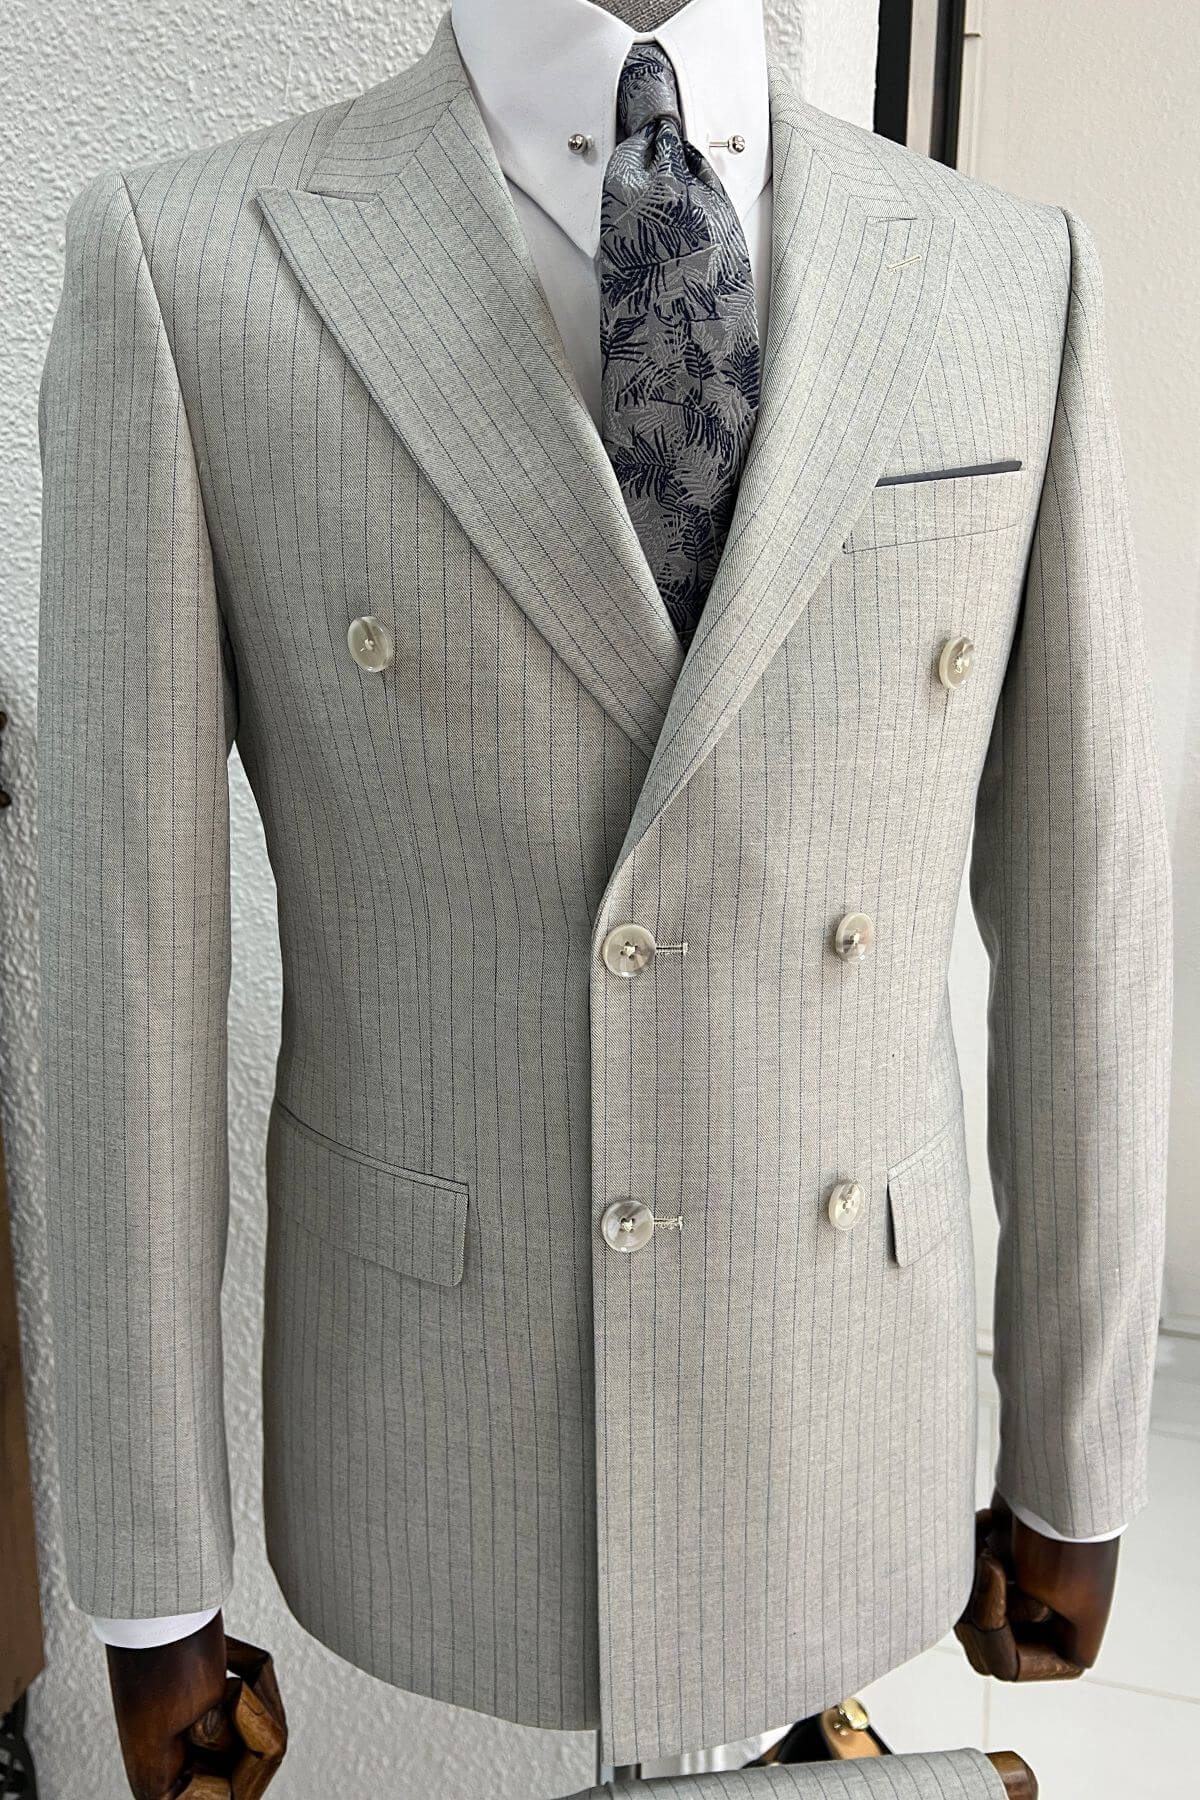 A striped gray double breasted suit on display